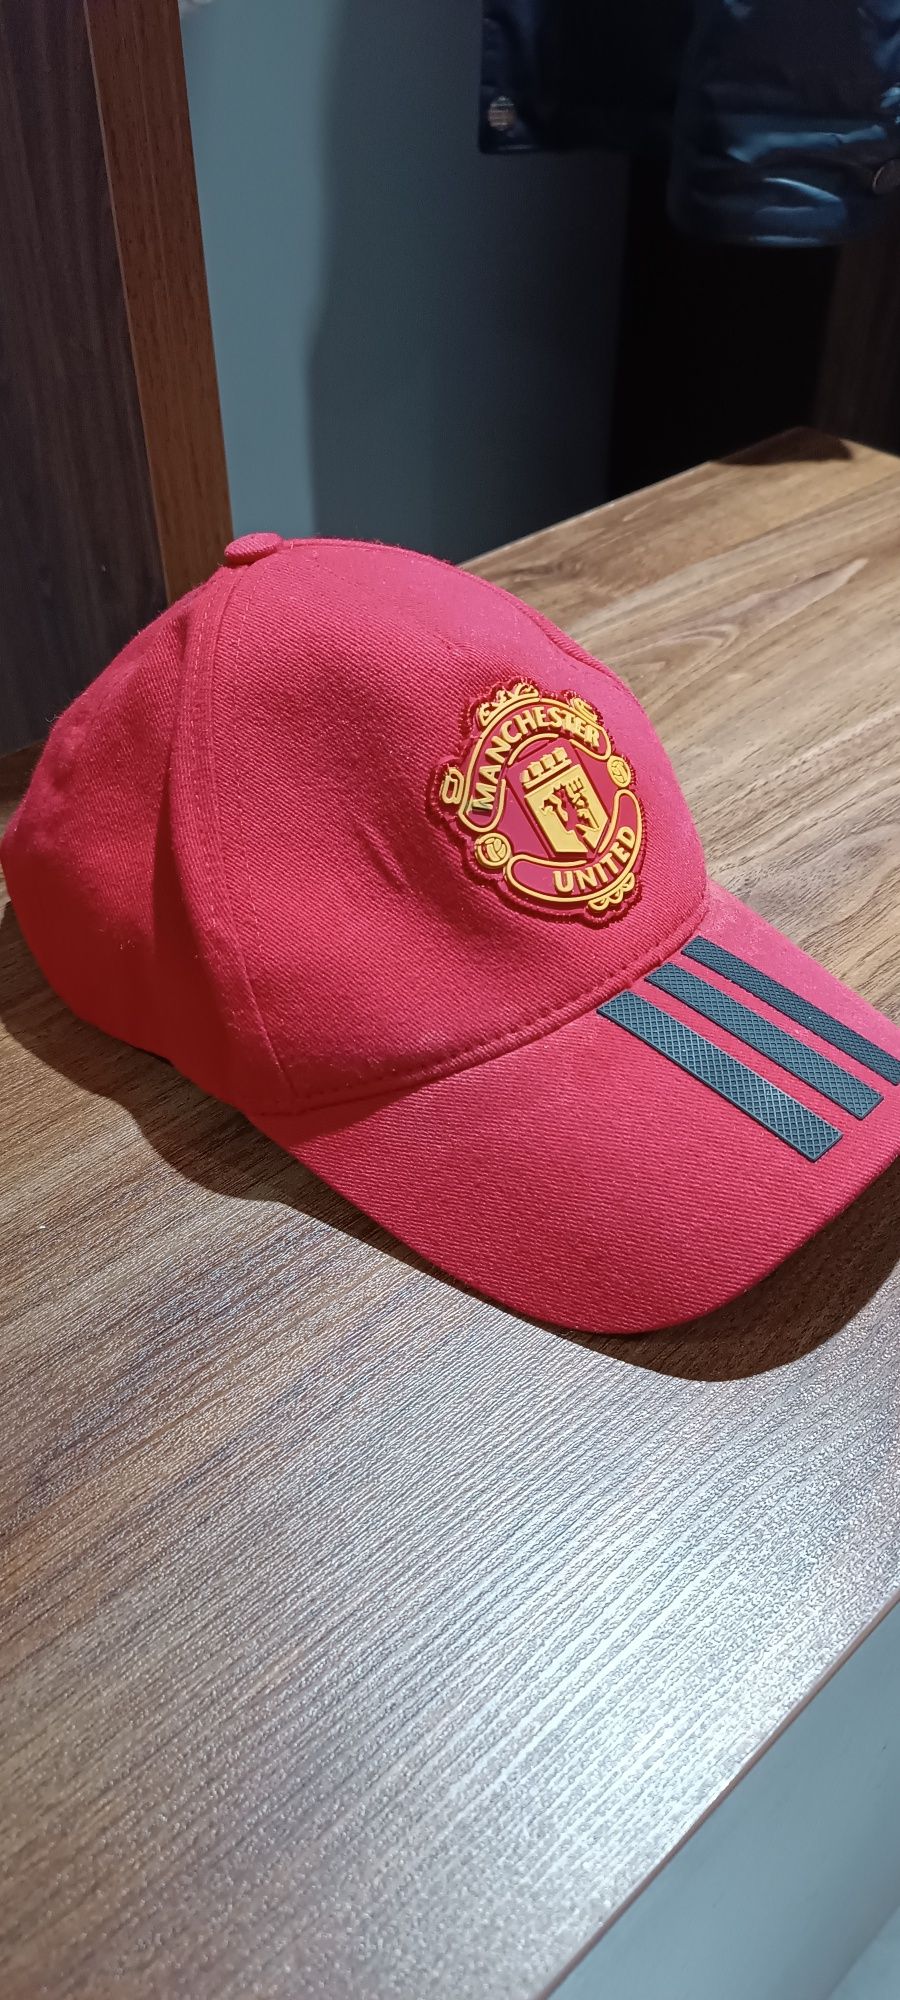 Кепка Manchester United